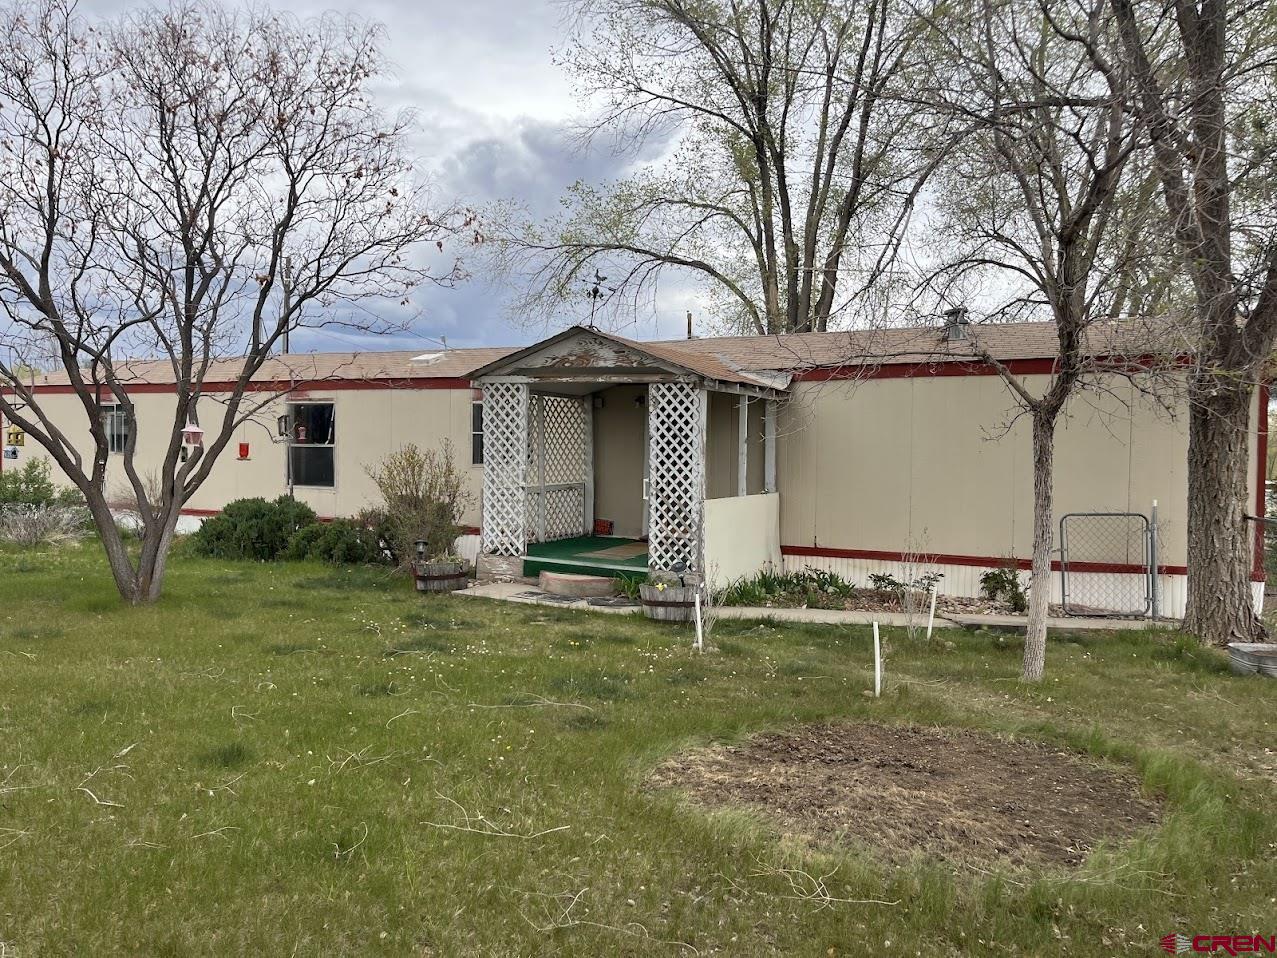 Photo of 1310 Jackson St in Cortez, CO